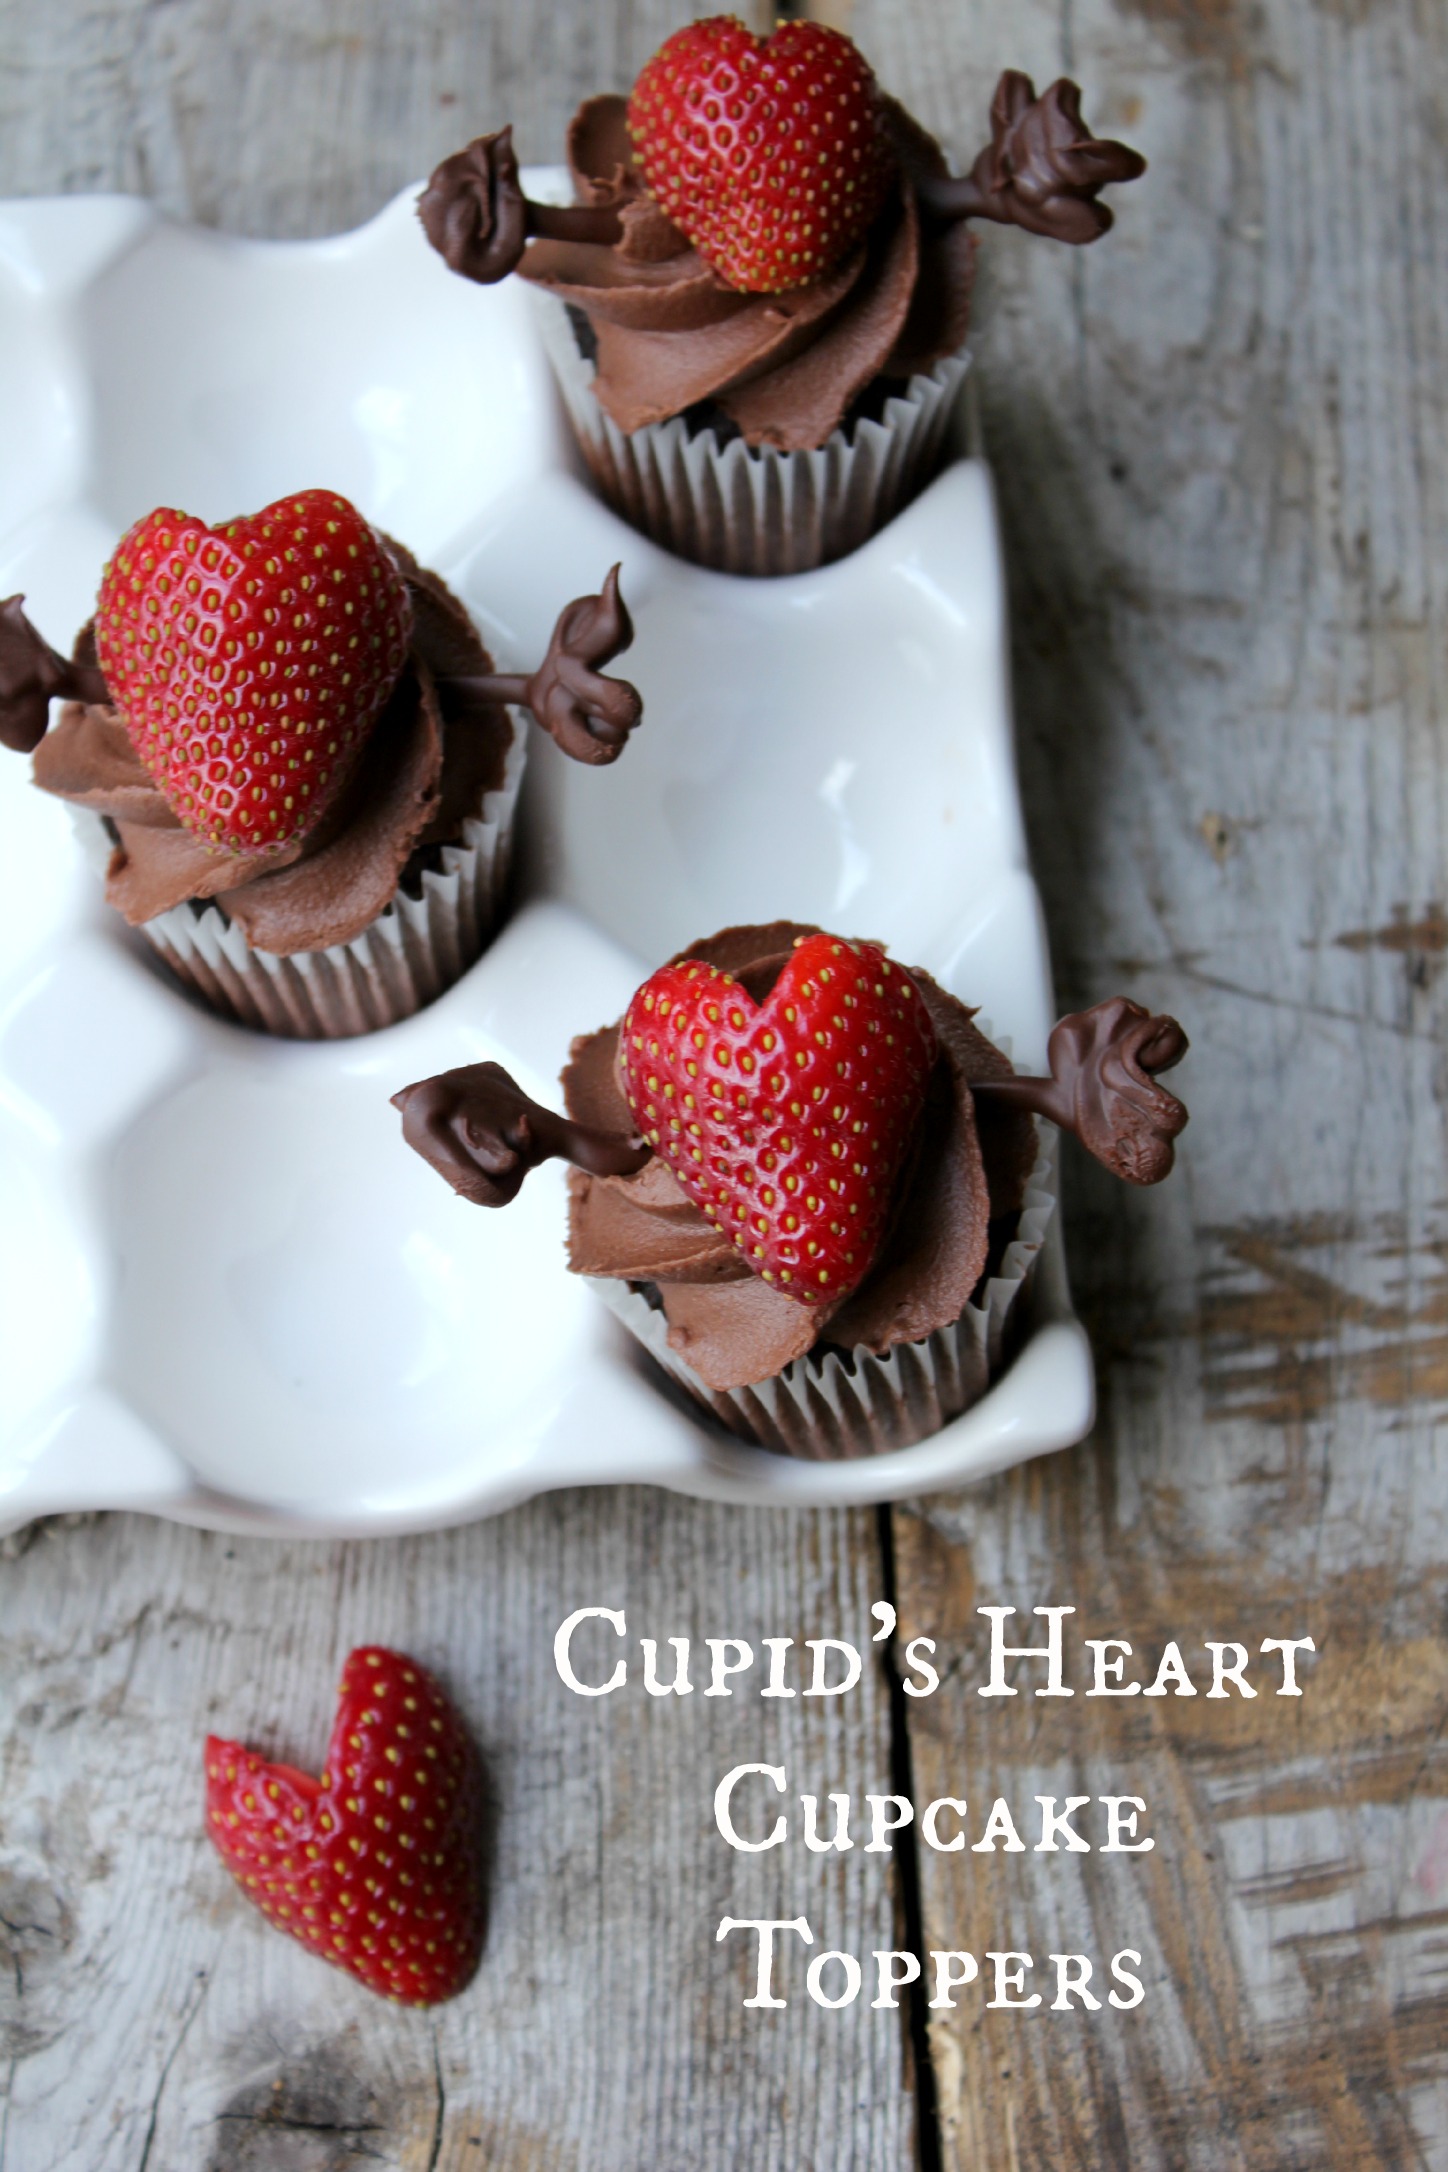 Cupid’s Heart Cupcake Toppers